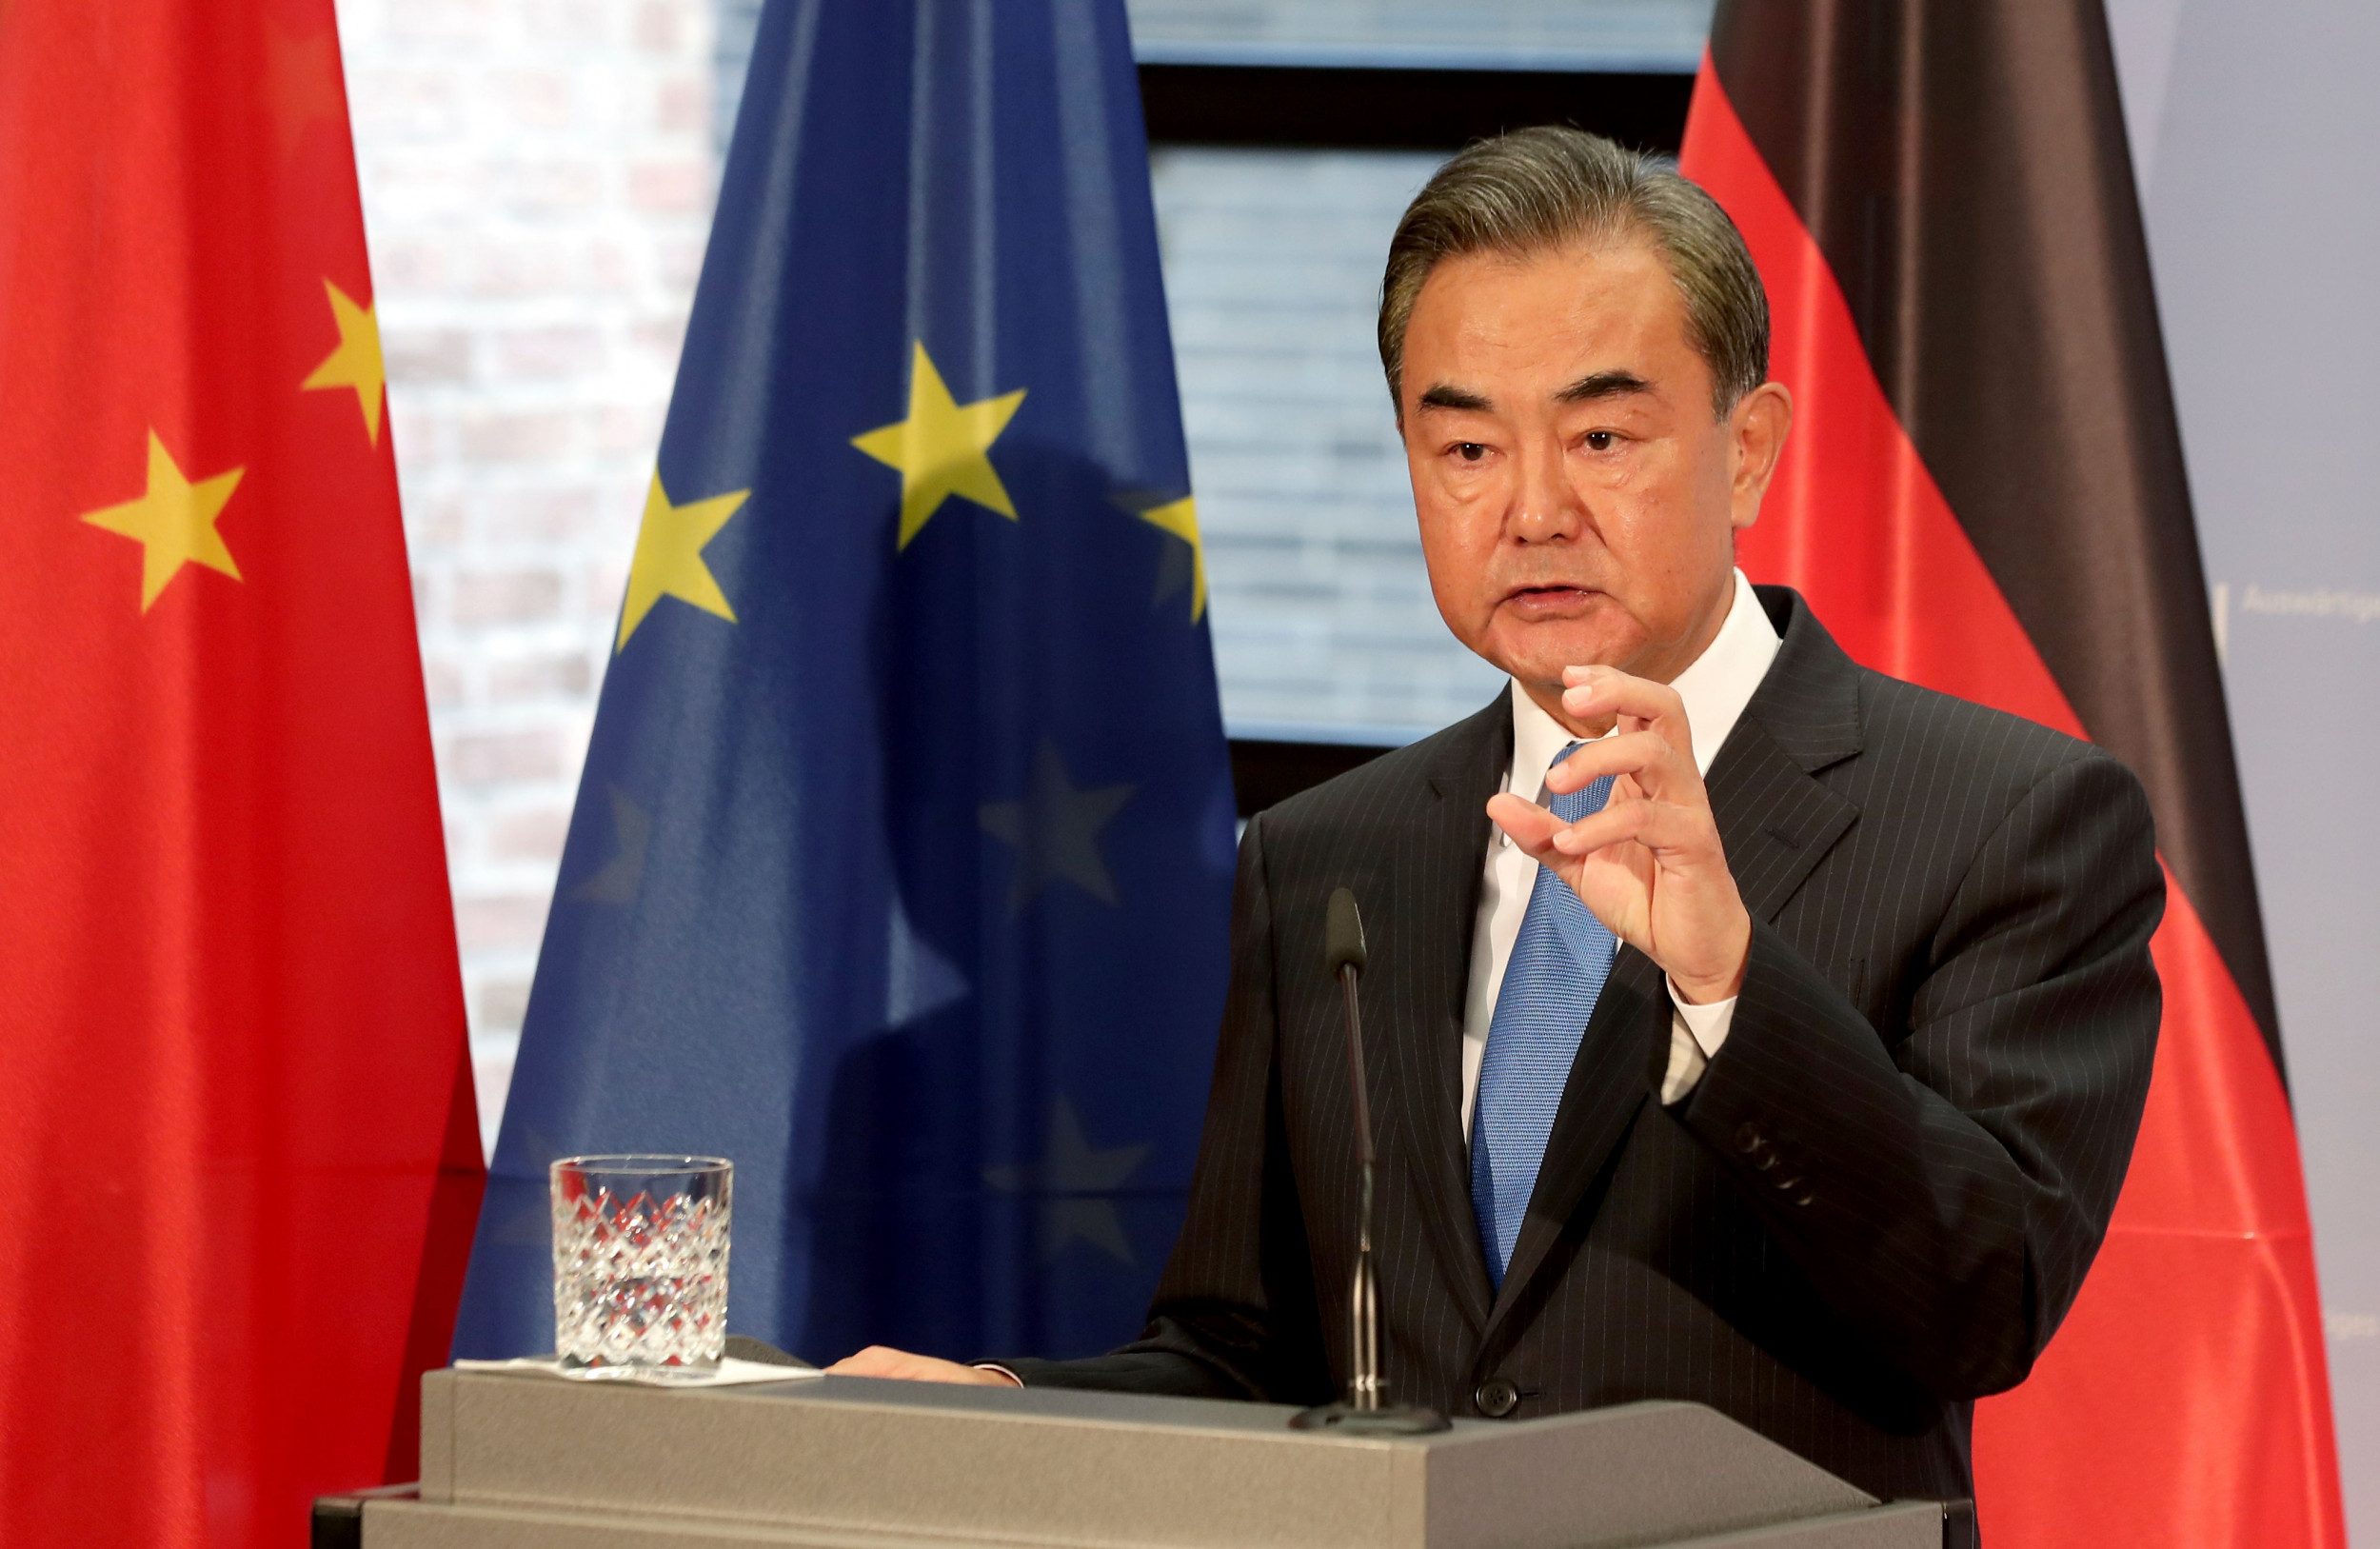 China's Foreign Minister Suggests America Stop Meddling in Country's Affairs: 'The U.S. Has Gone Too Far'